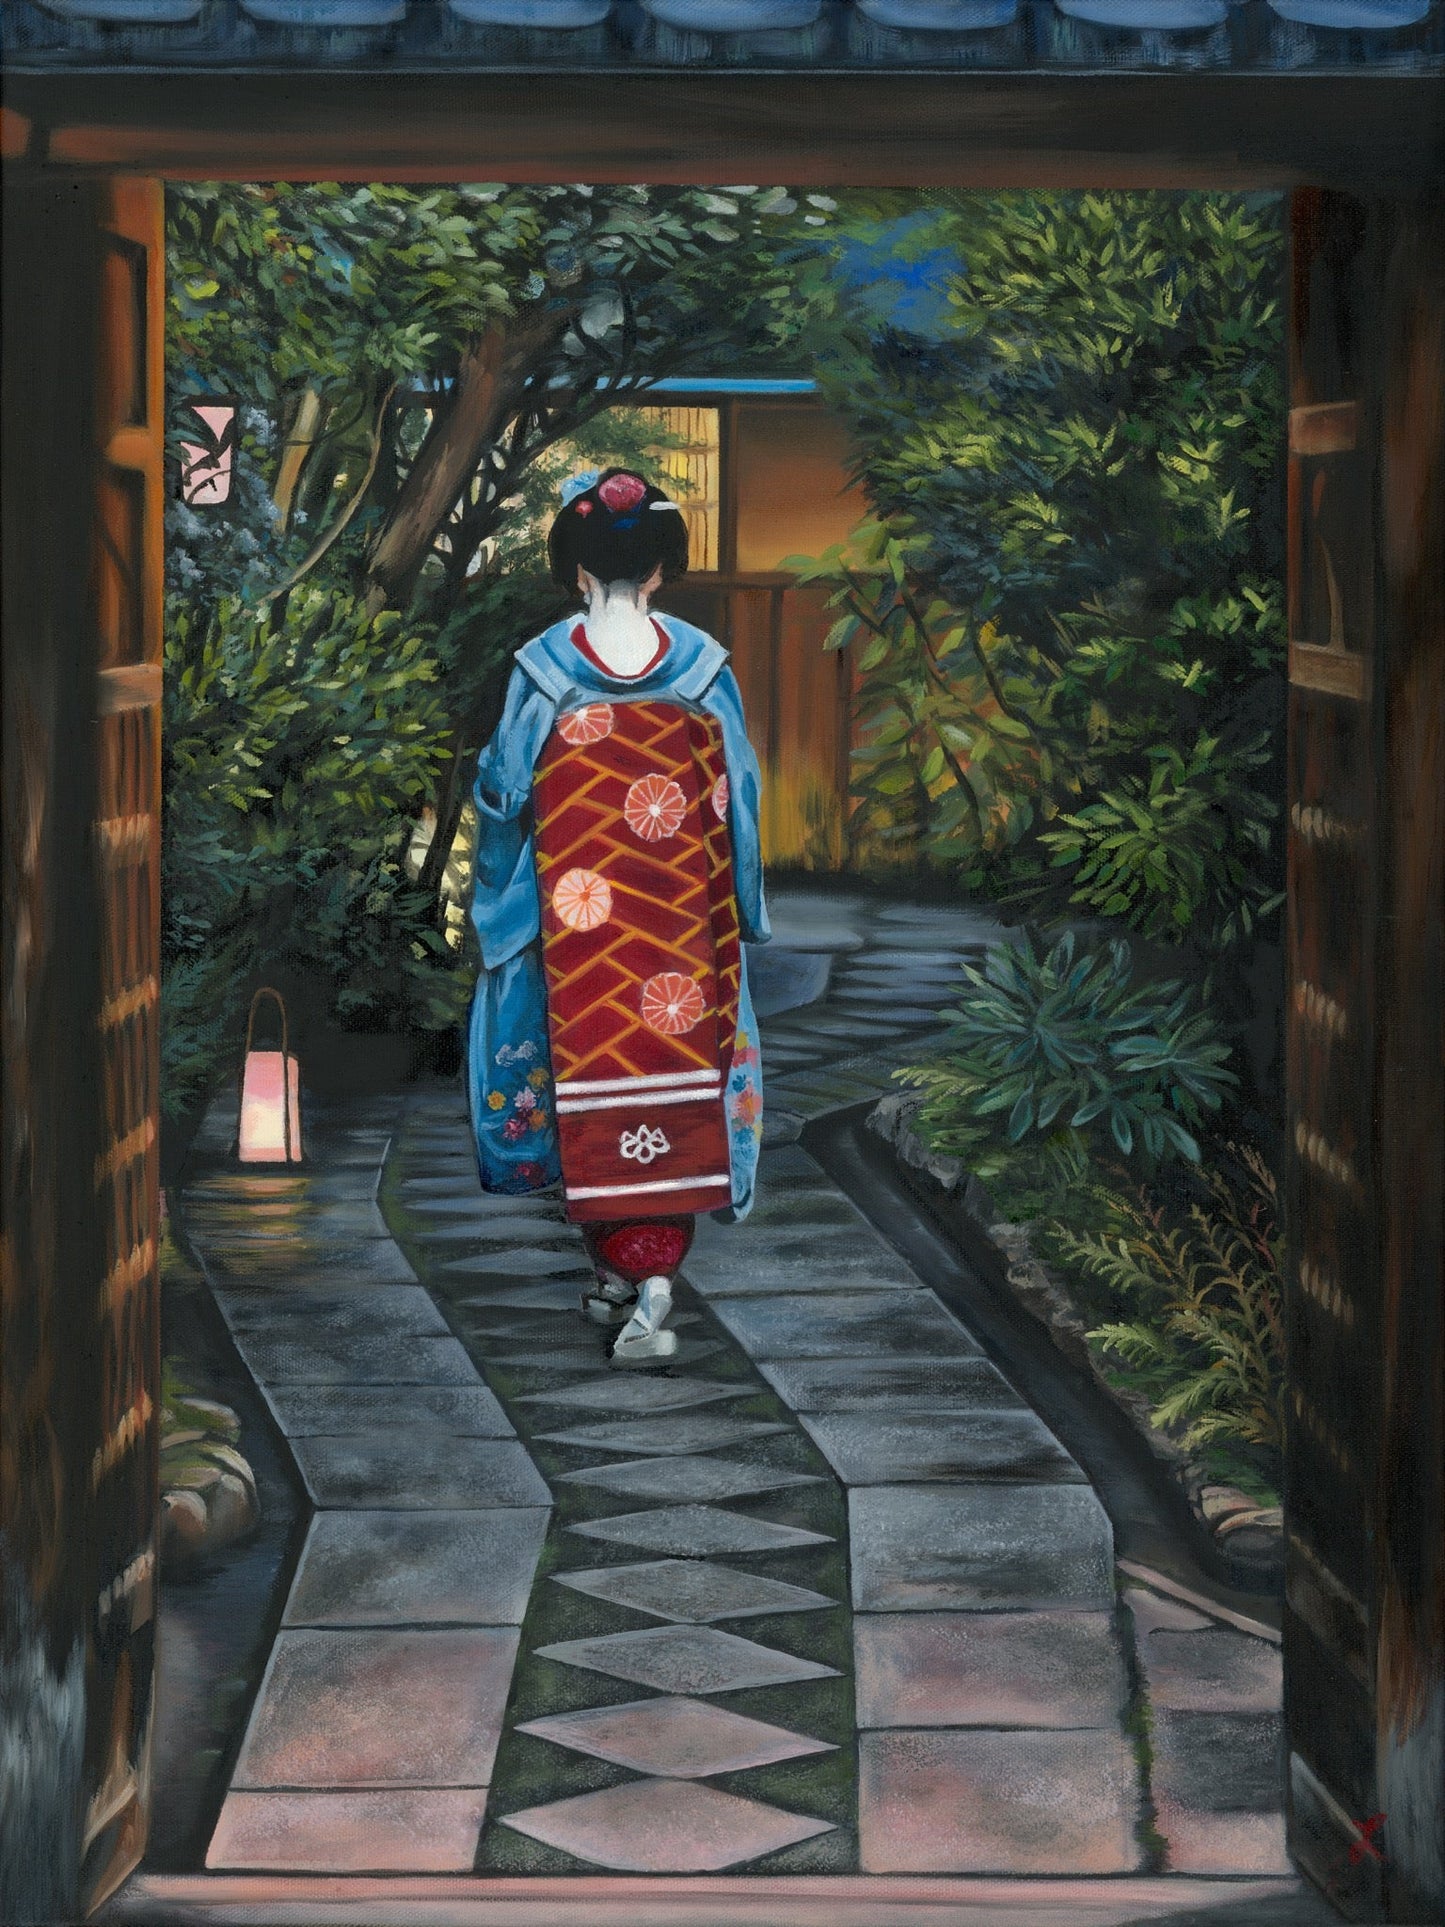 "Gion" by Laura Virgin Signed Giclée Print 10"x13" Geisha Kyoto Limited Edition